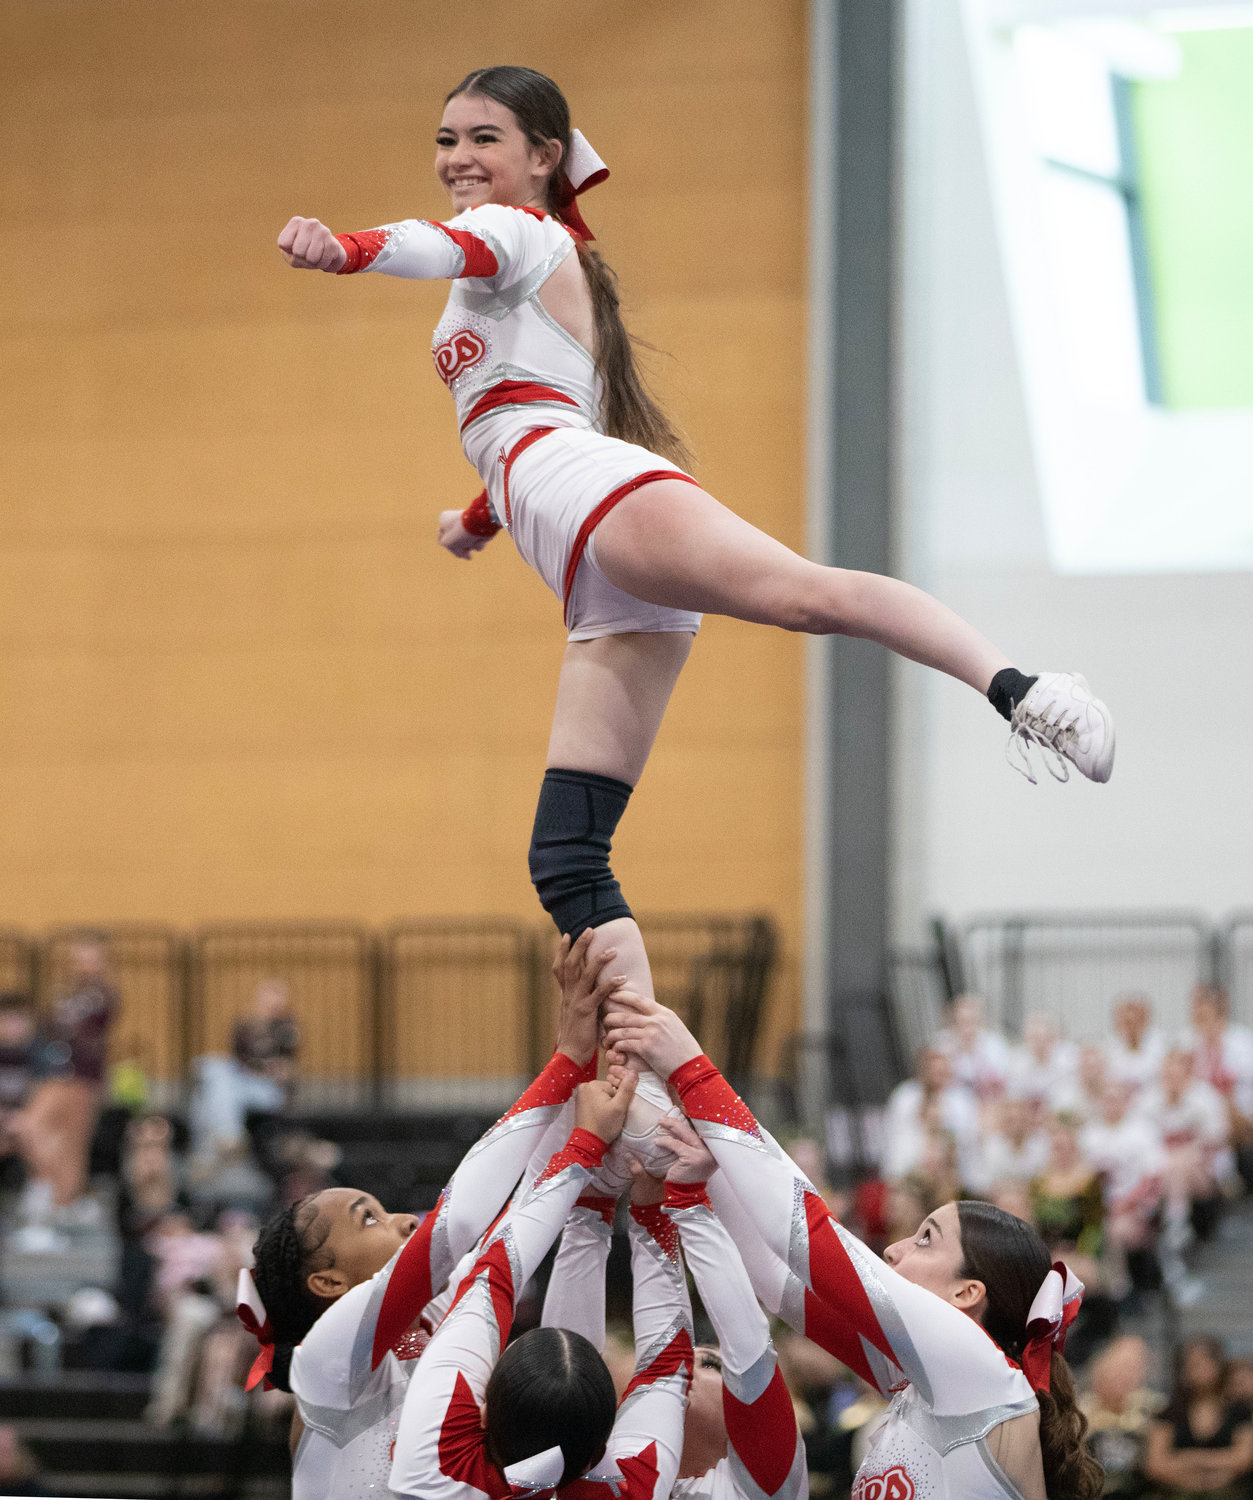 Mackenzie Pacheco performs a stunt atop her teammates.